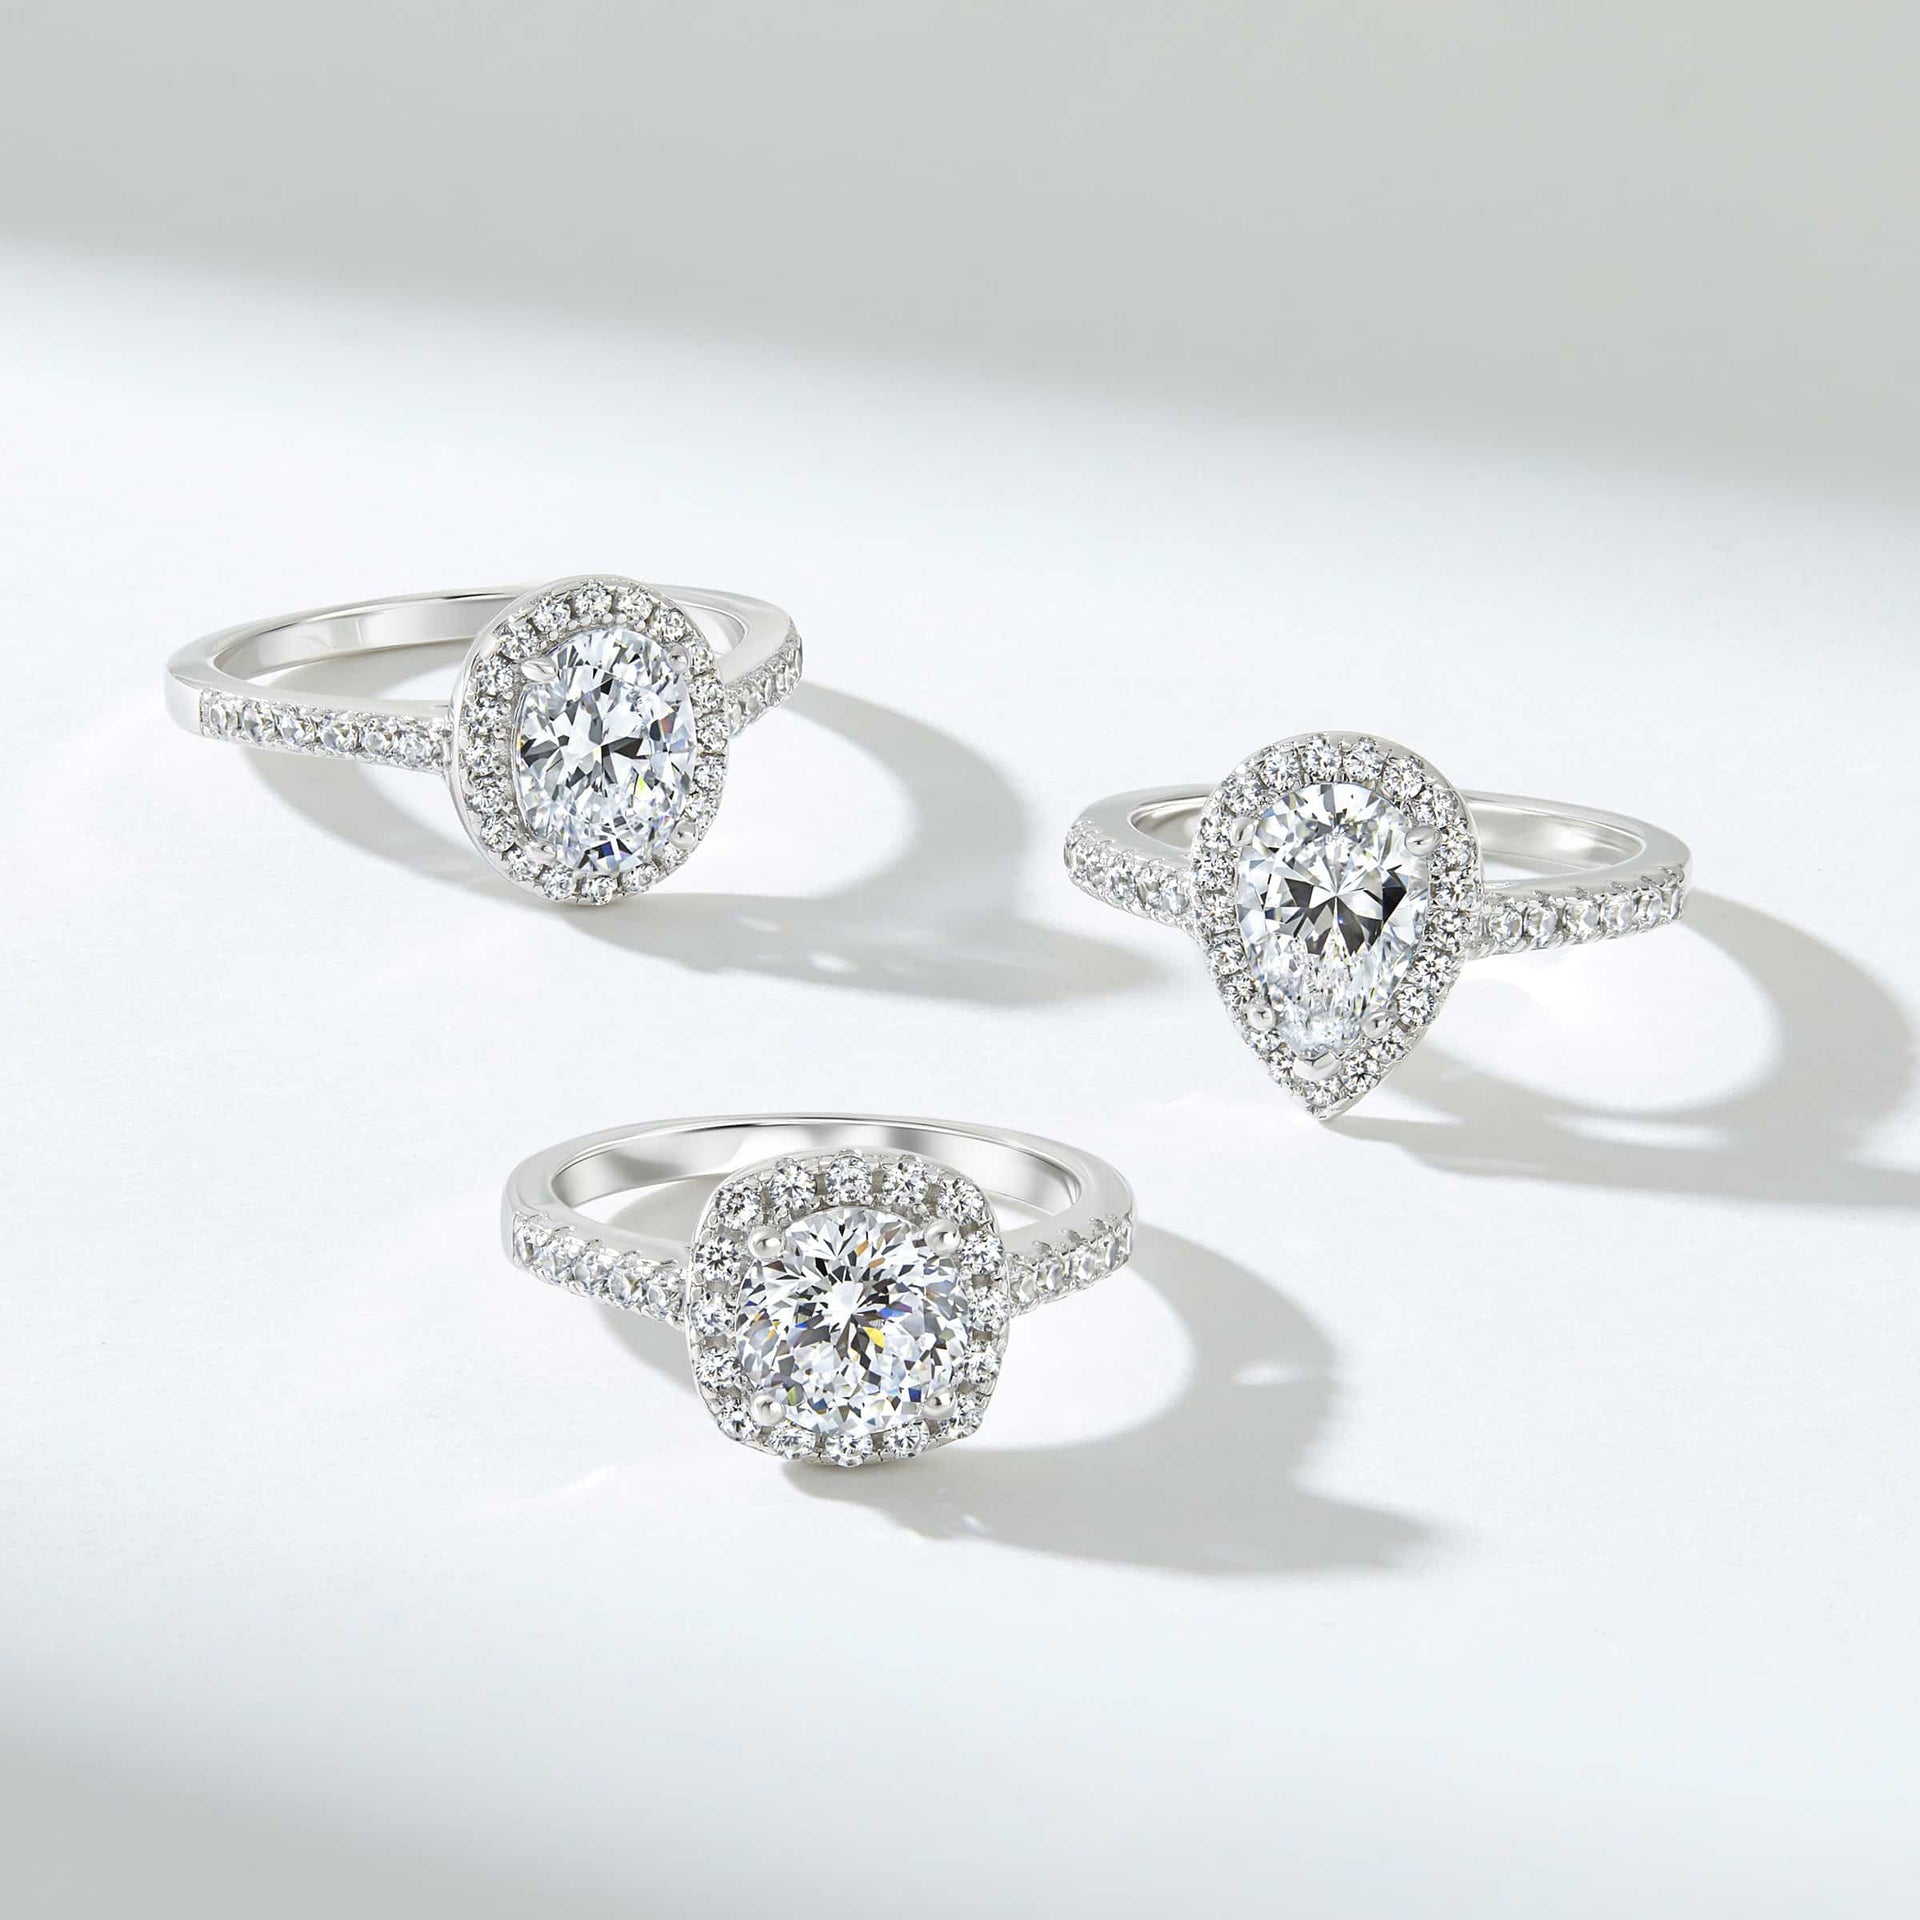 three silver engagement rings with halos placed on a grayish background